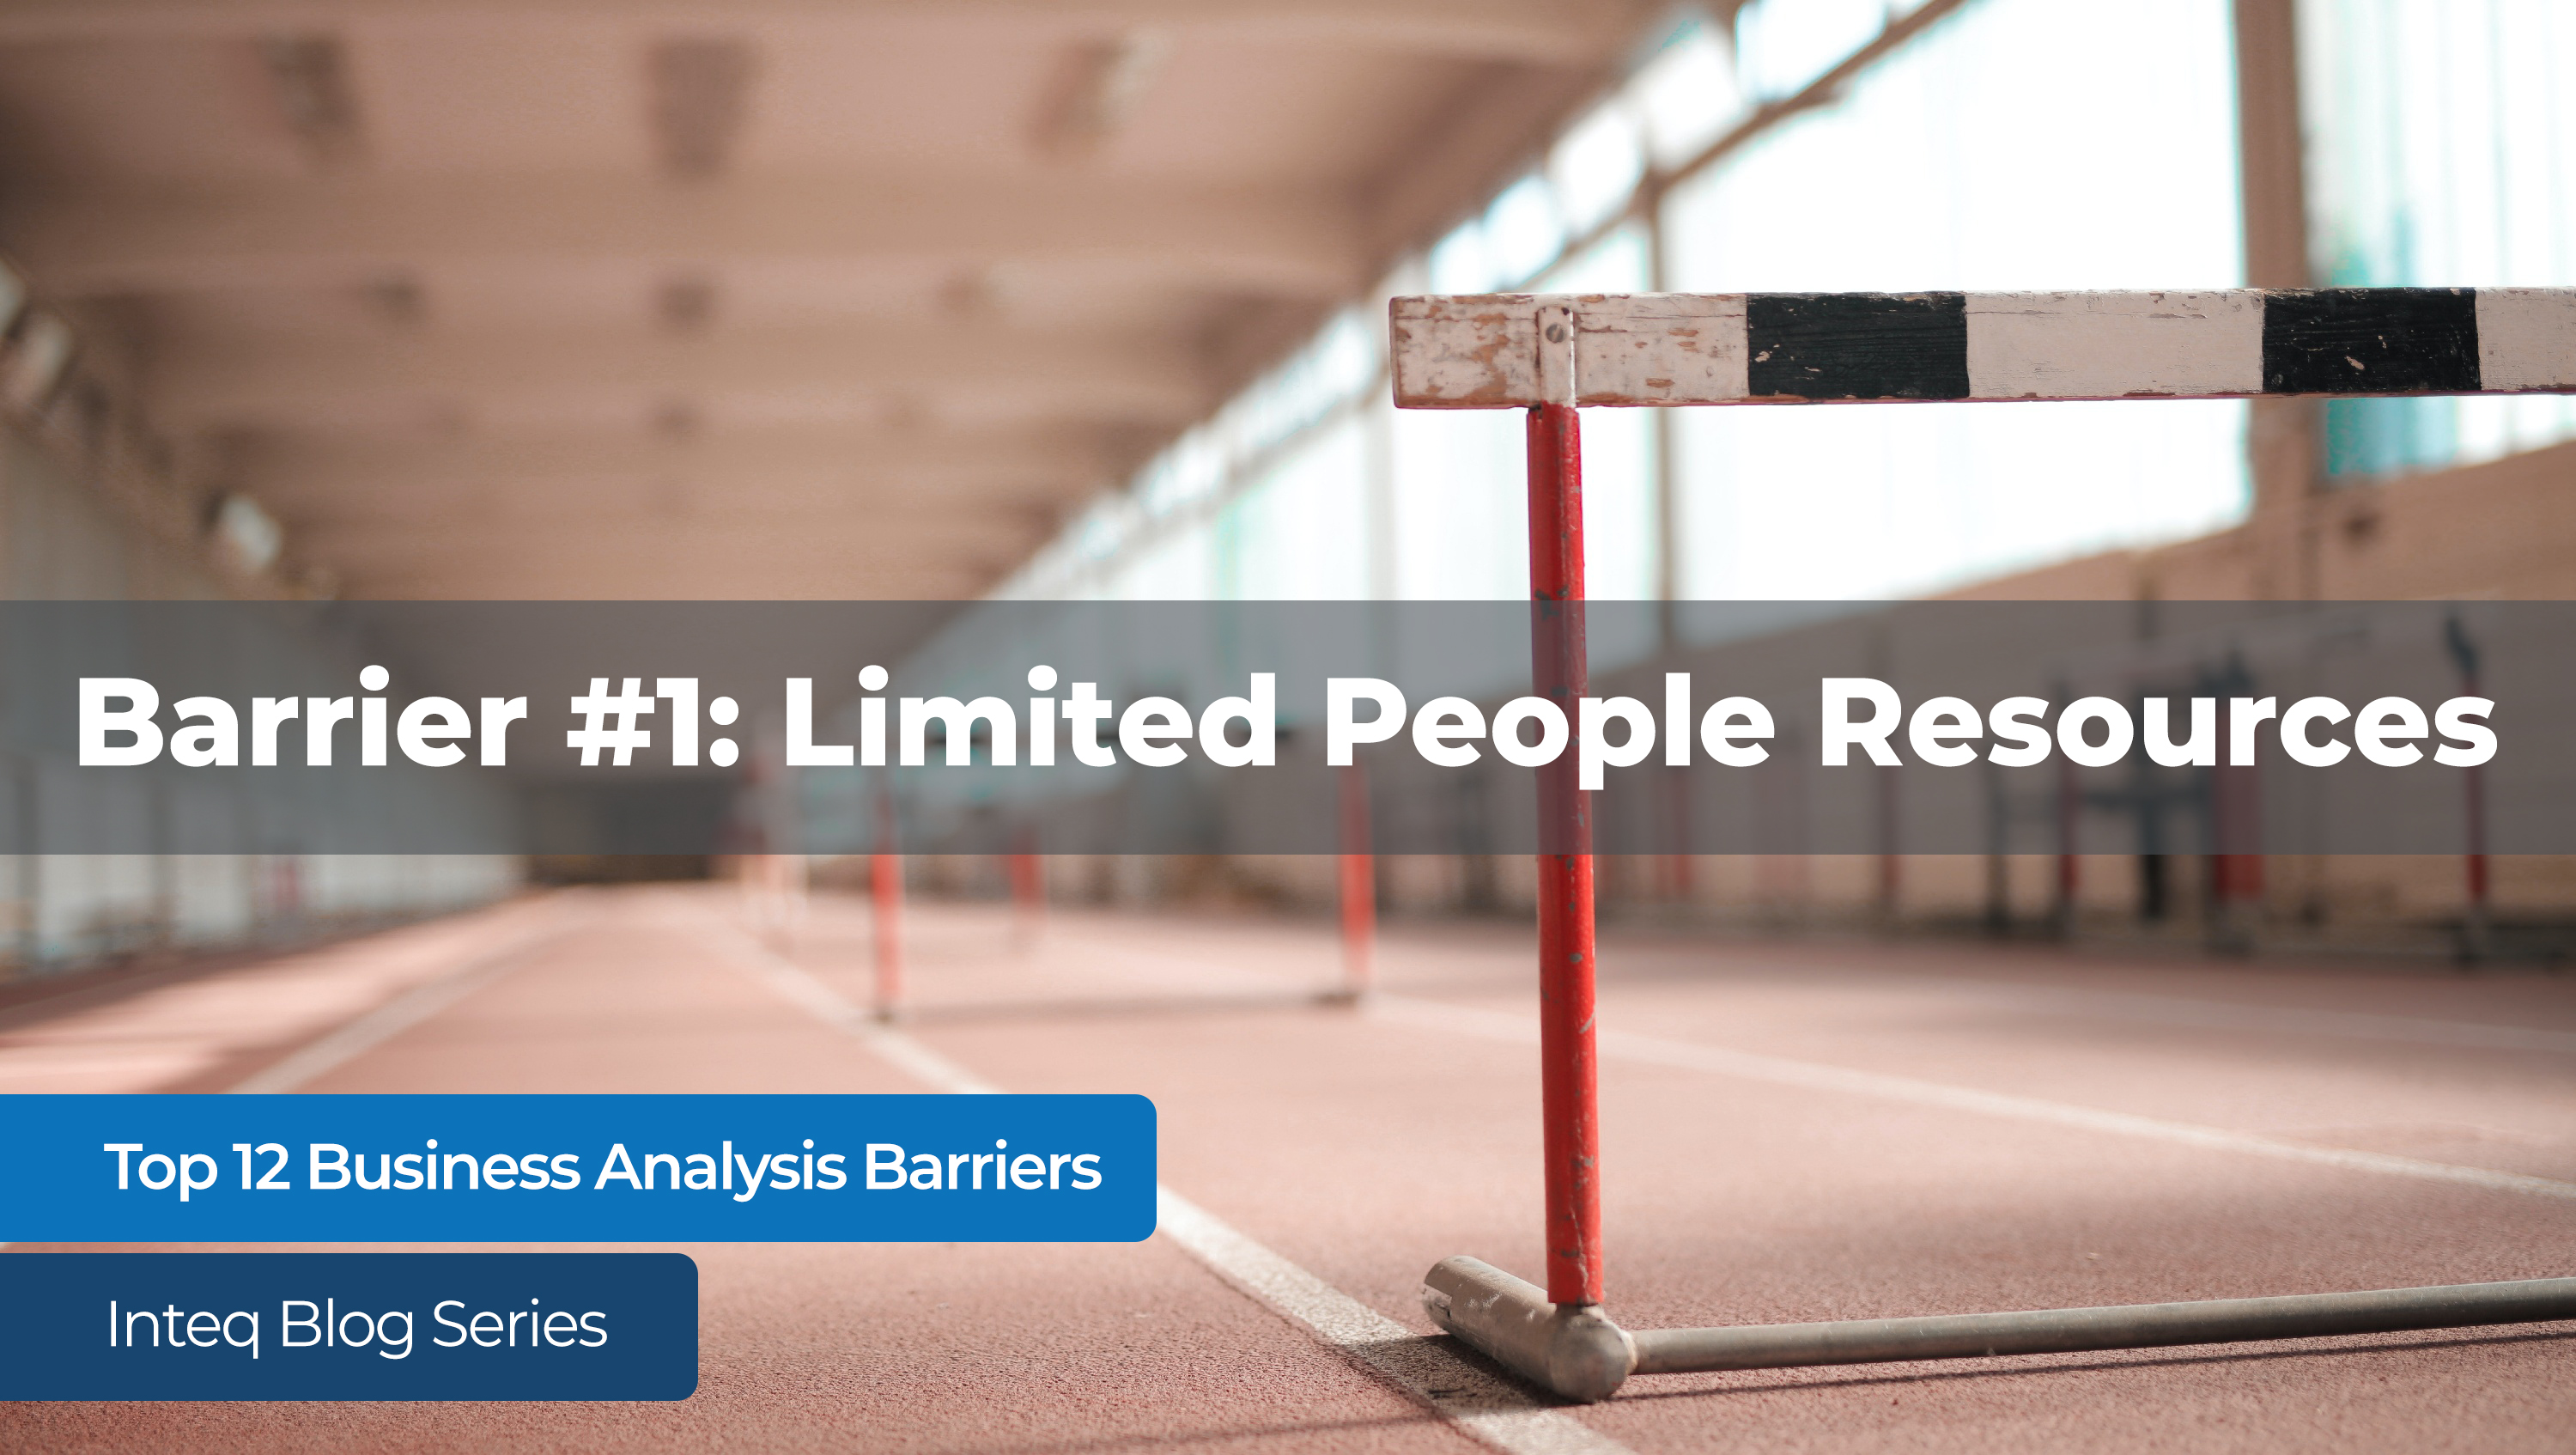 Top 12 Business Analysis Barriers: #1 Limited People Resources